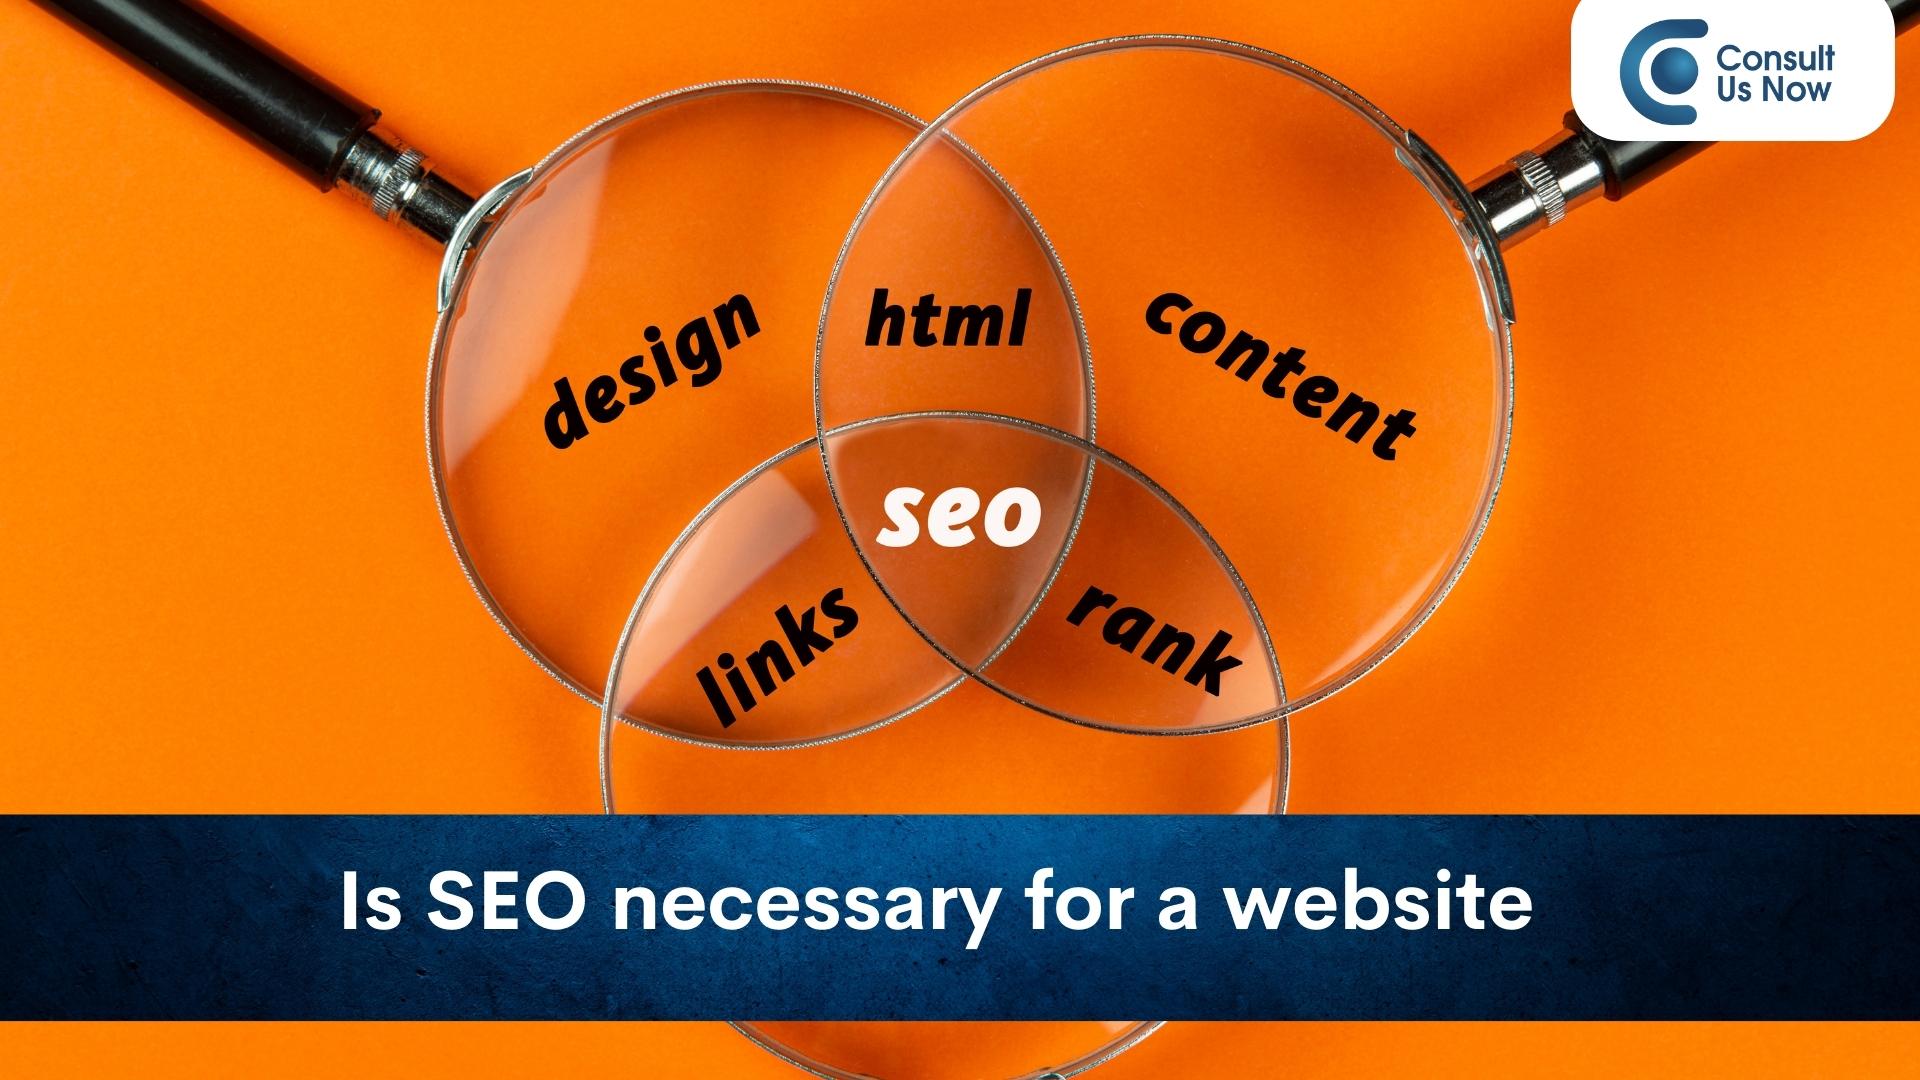 Is seo necessary for a website?